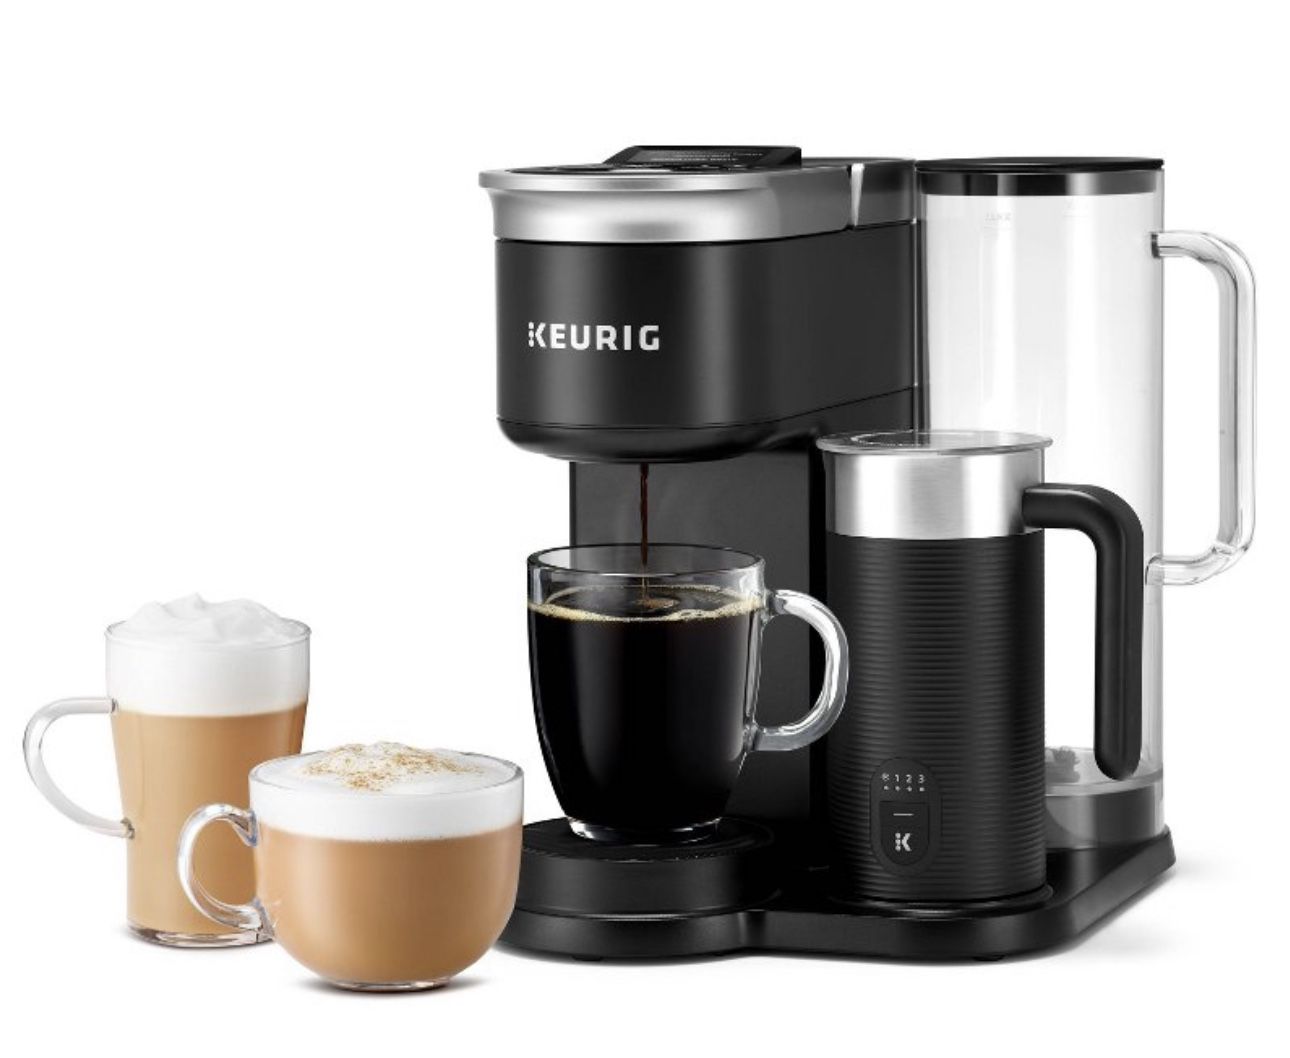 Keurig K-cup Smart Coffee Machine With WiFi Compatibility, New